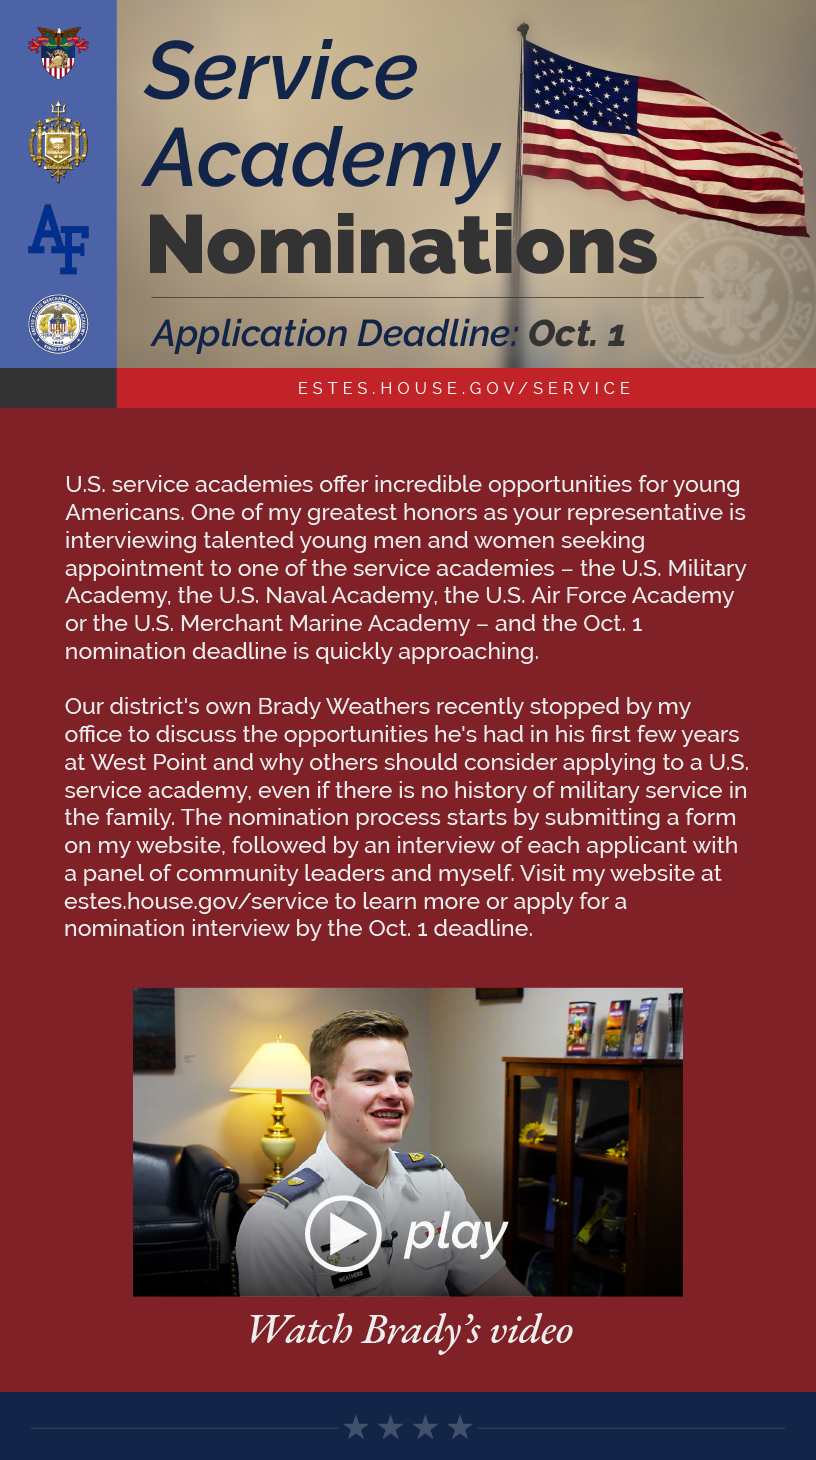 Headline: Service Academy Nominations.  U.S. service academies offer incredible opportunities for young Americans. One of my greatest honors as your representative is interviewing talented young men and women seeking appointment to one of the service academies – the U.S. Military Academy, the U.S. Naval Academy, the U.S. Air Force Academy or the U.S. Merchant Marine Academy – and the Oct. 1 nomination deadline is quickly approaching.  Our district's own Brady Weathers recently stopped by my office to discuss the opportunities he's had in his first few years at West Point and why others should consider applying to a U.S. service academy, even if there is no history of military service in the family. The nomination process starts by submitting a form on my website, followed by an interview of each applicant with a panel of community leaders and myself. Visit my website at estes.house.gov/service to learn more or apply for a nomination interview by the Oct. 1 deadline.   LINK: https://youtu.be/sVy-G0v5HlI